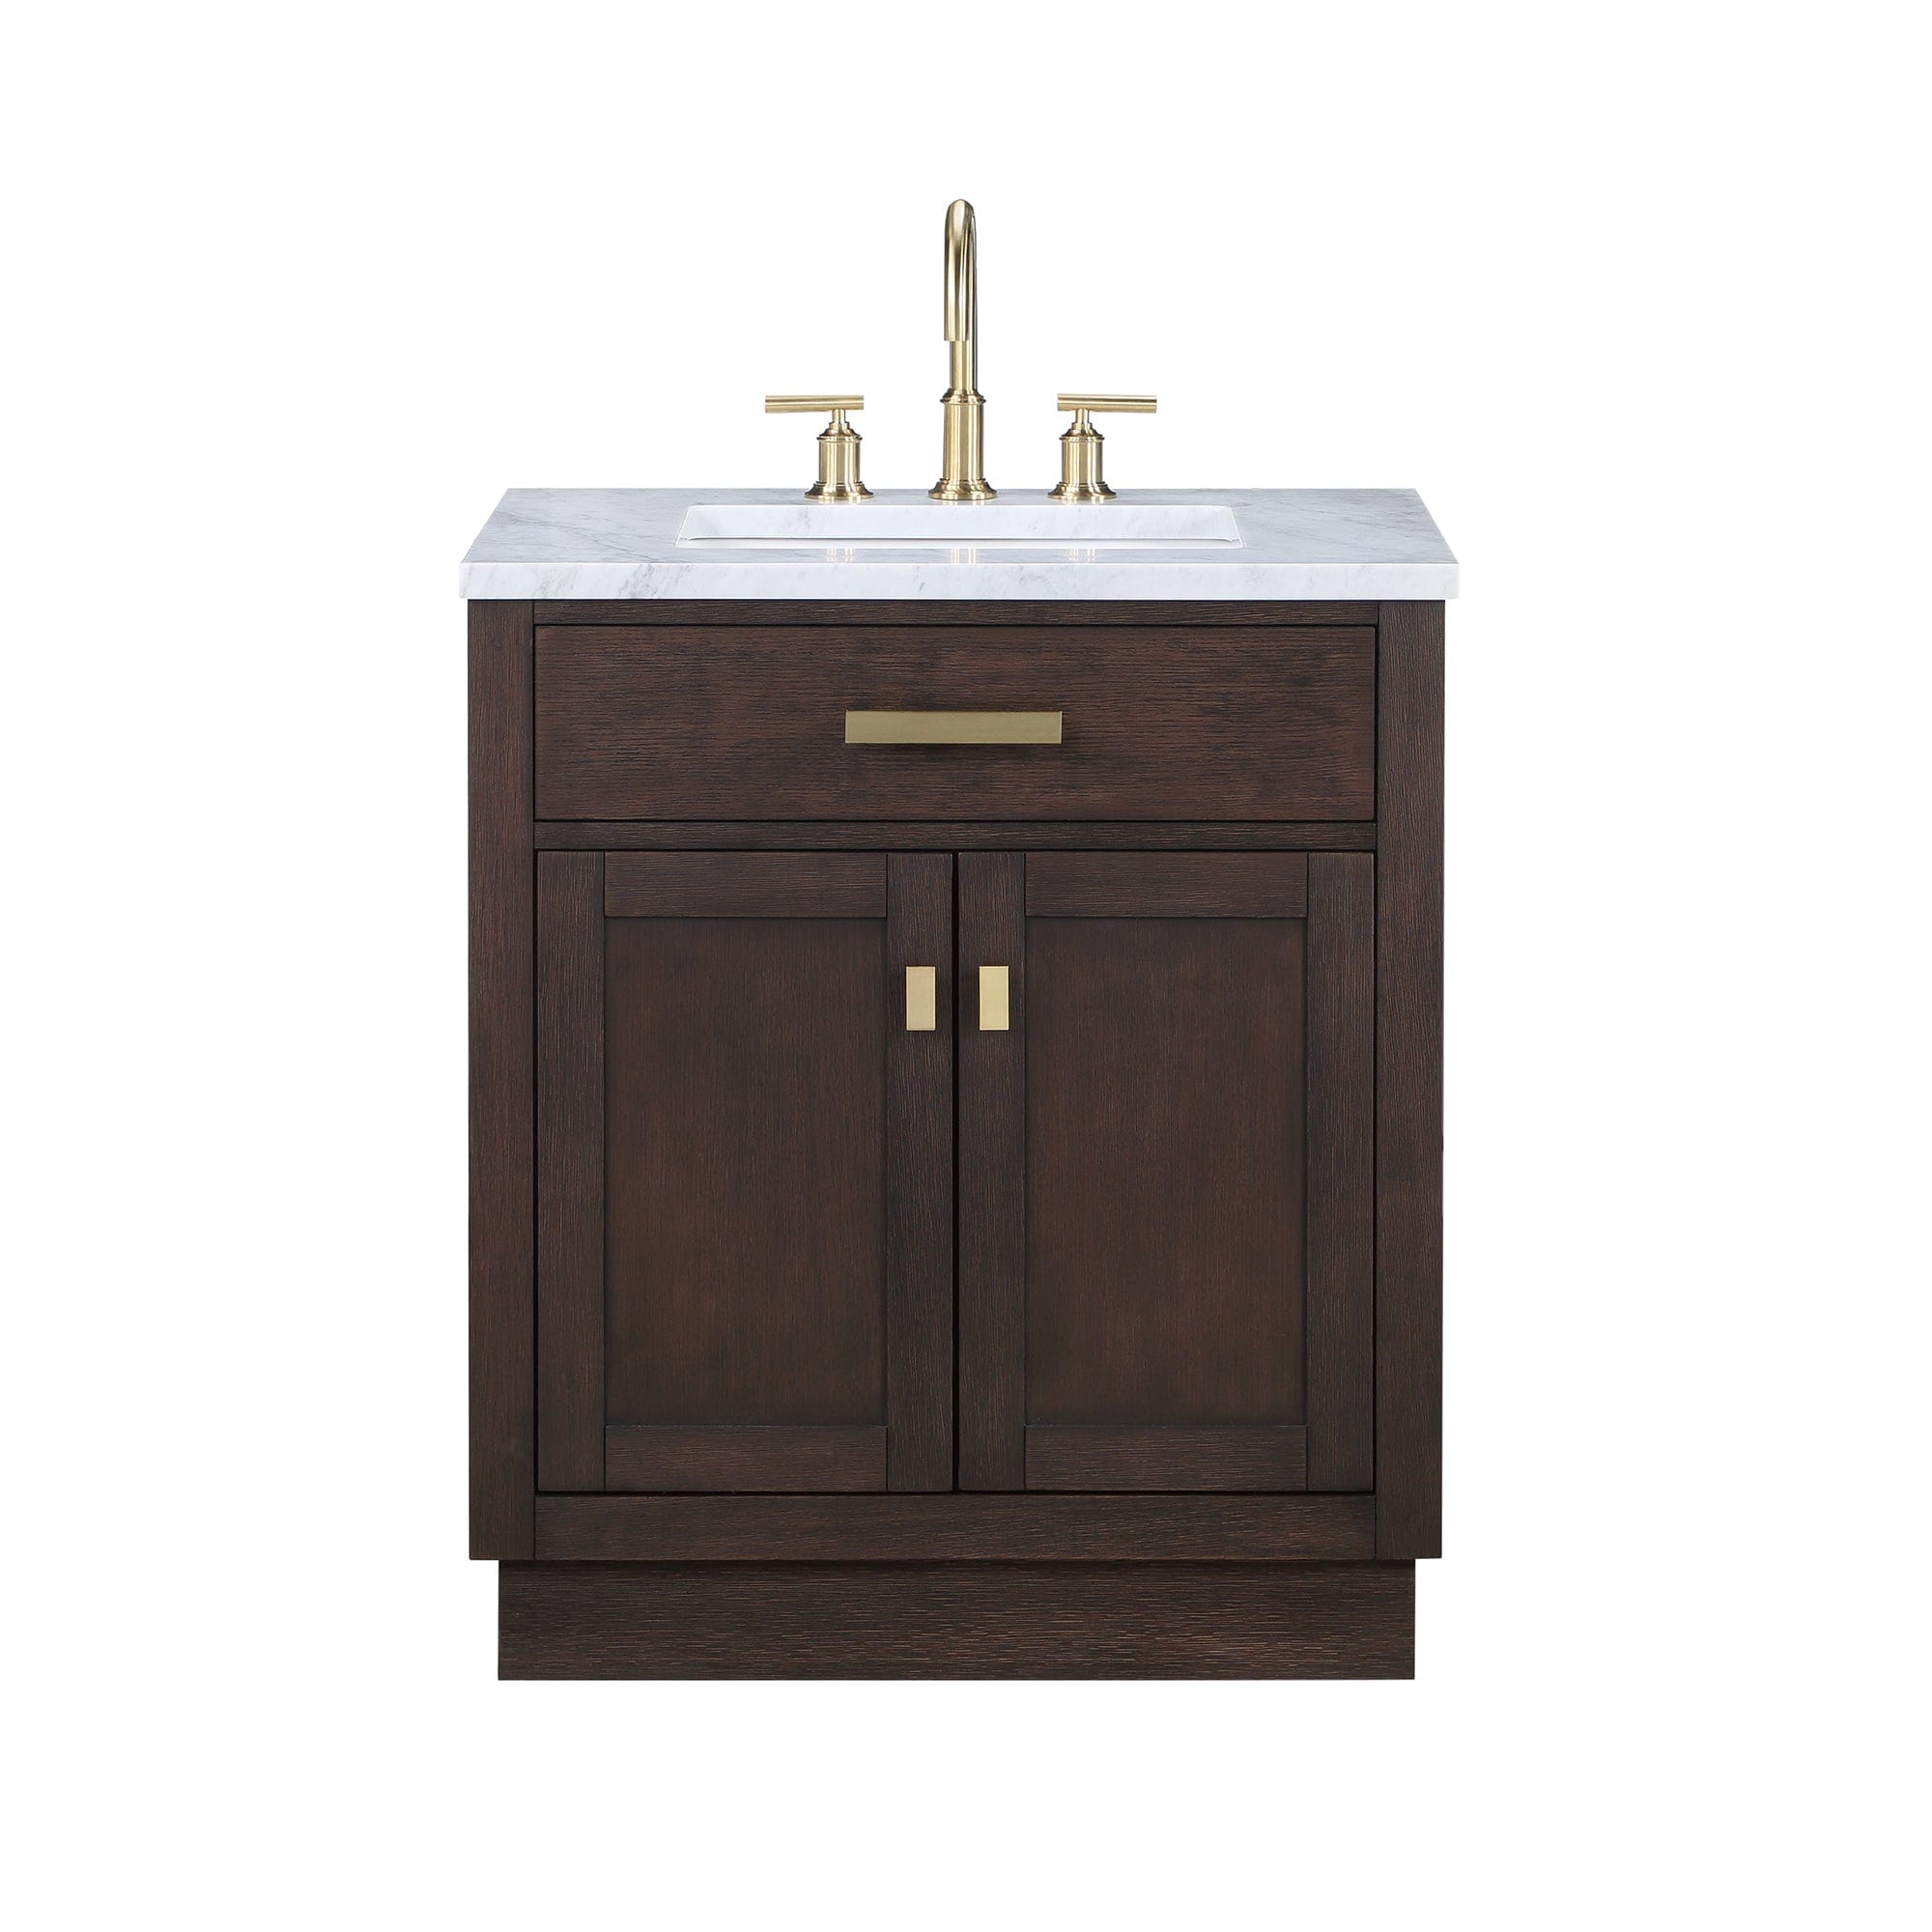 Chestnut 30 In. Single Sink Carrara White Marble Countertop Vanity In Brown Oak with Grooseneck Faucet - Molaix732030764668CH30CW06BK-000BL1406